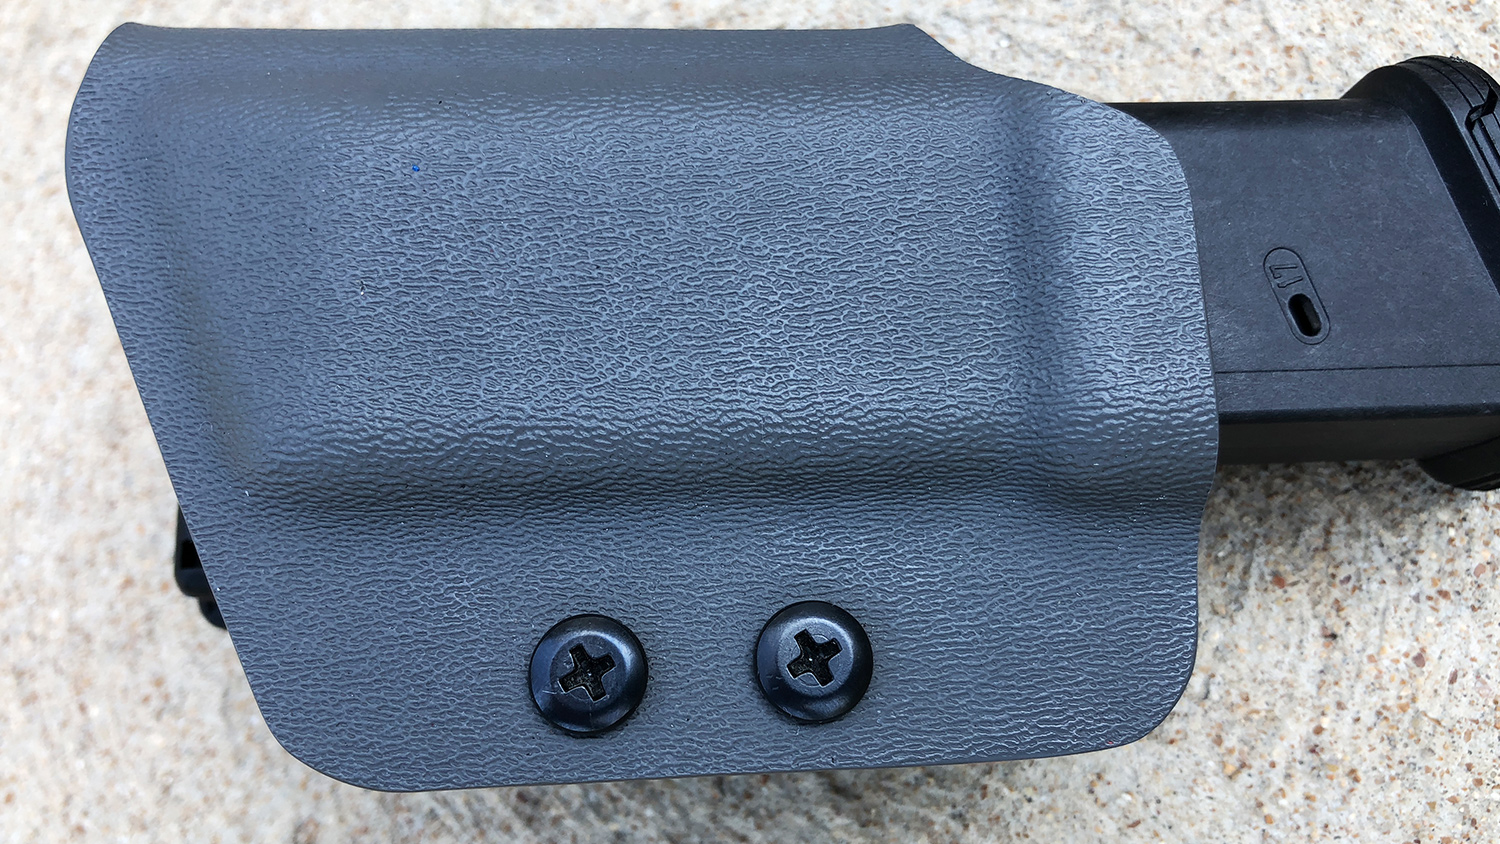 Gamer OWB Single Pistol mag pouches for Glock 17